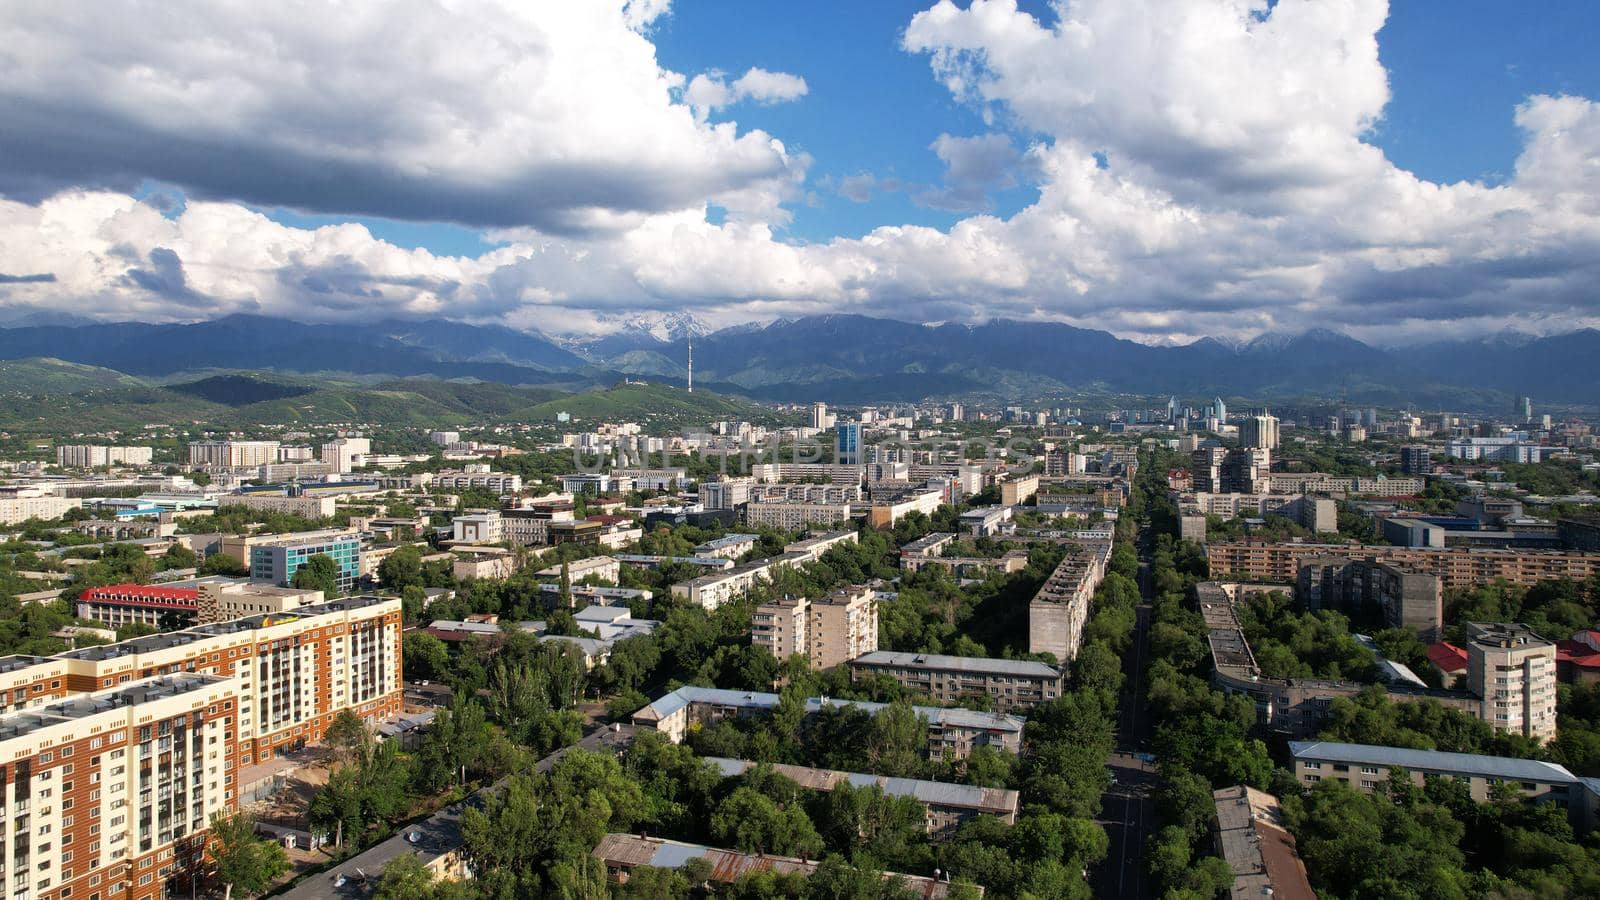 Large dark white clouds over the city of Almaty by Passcal